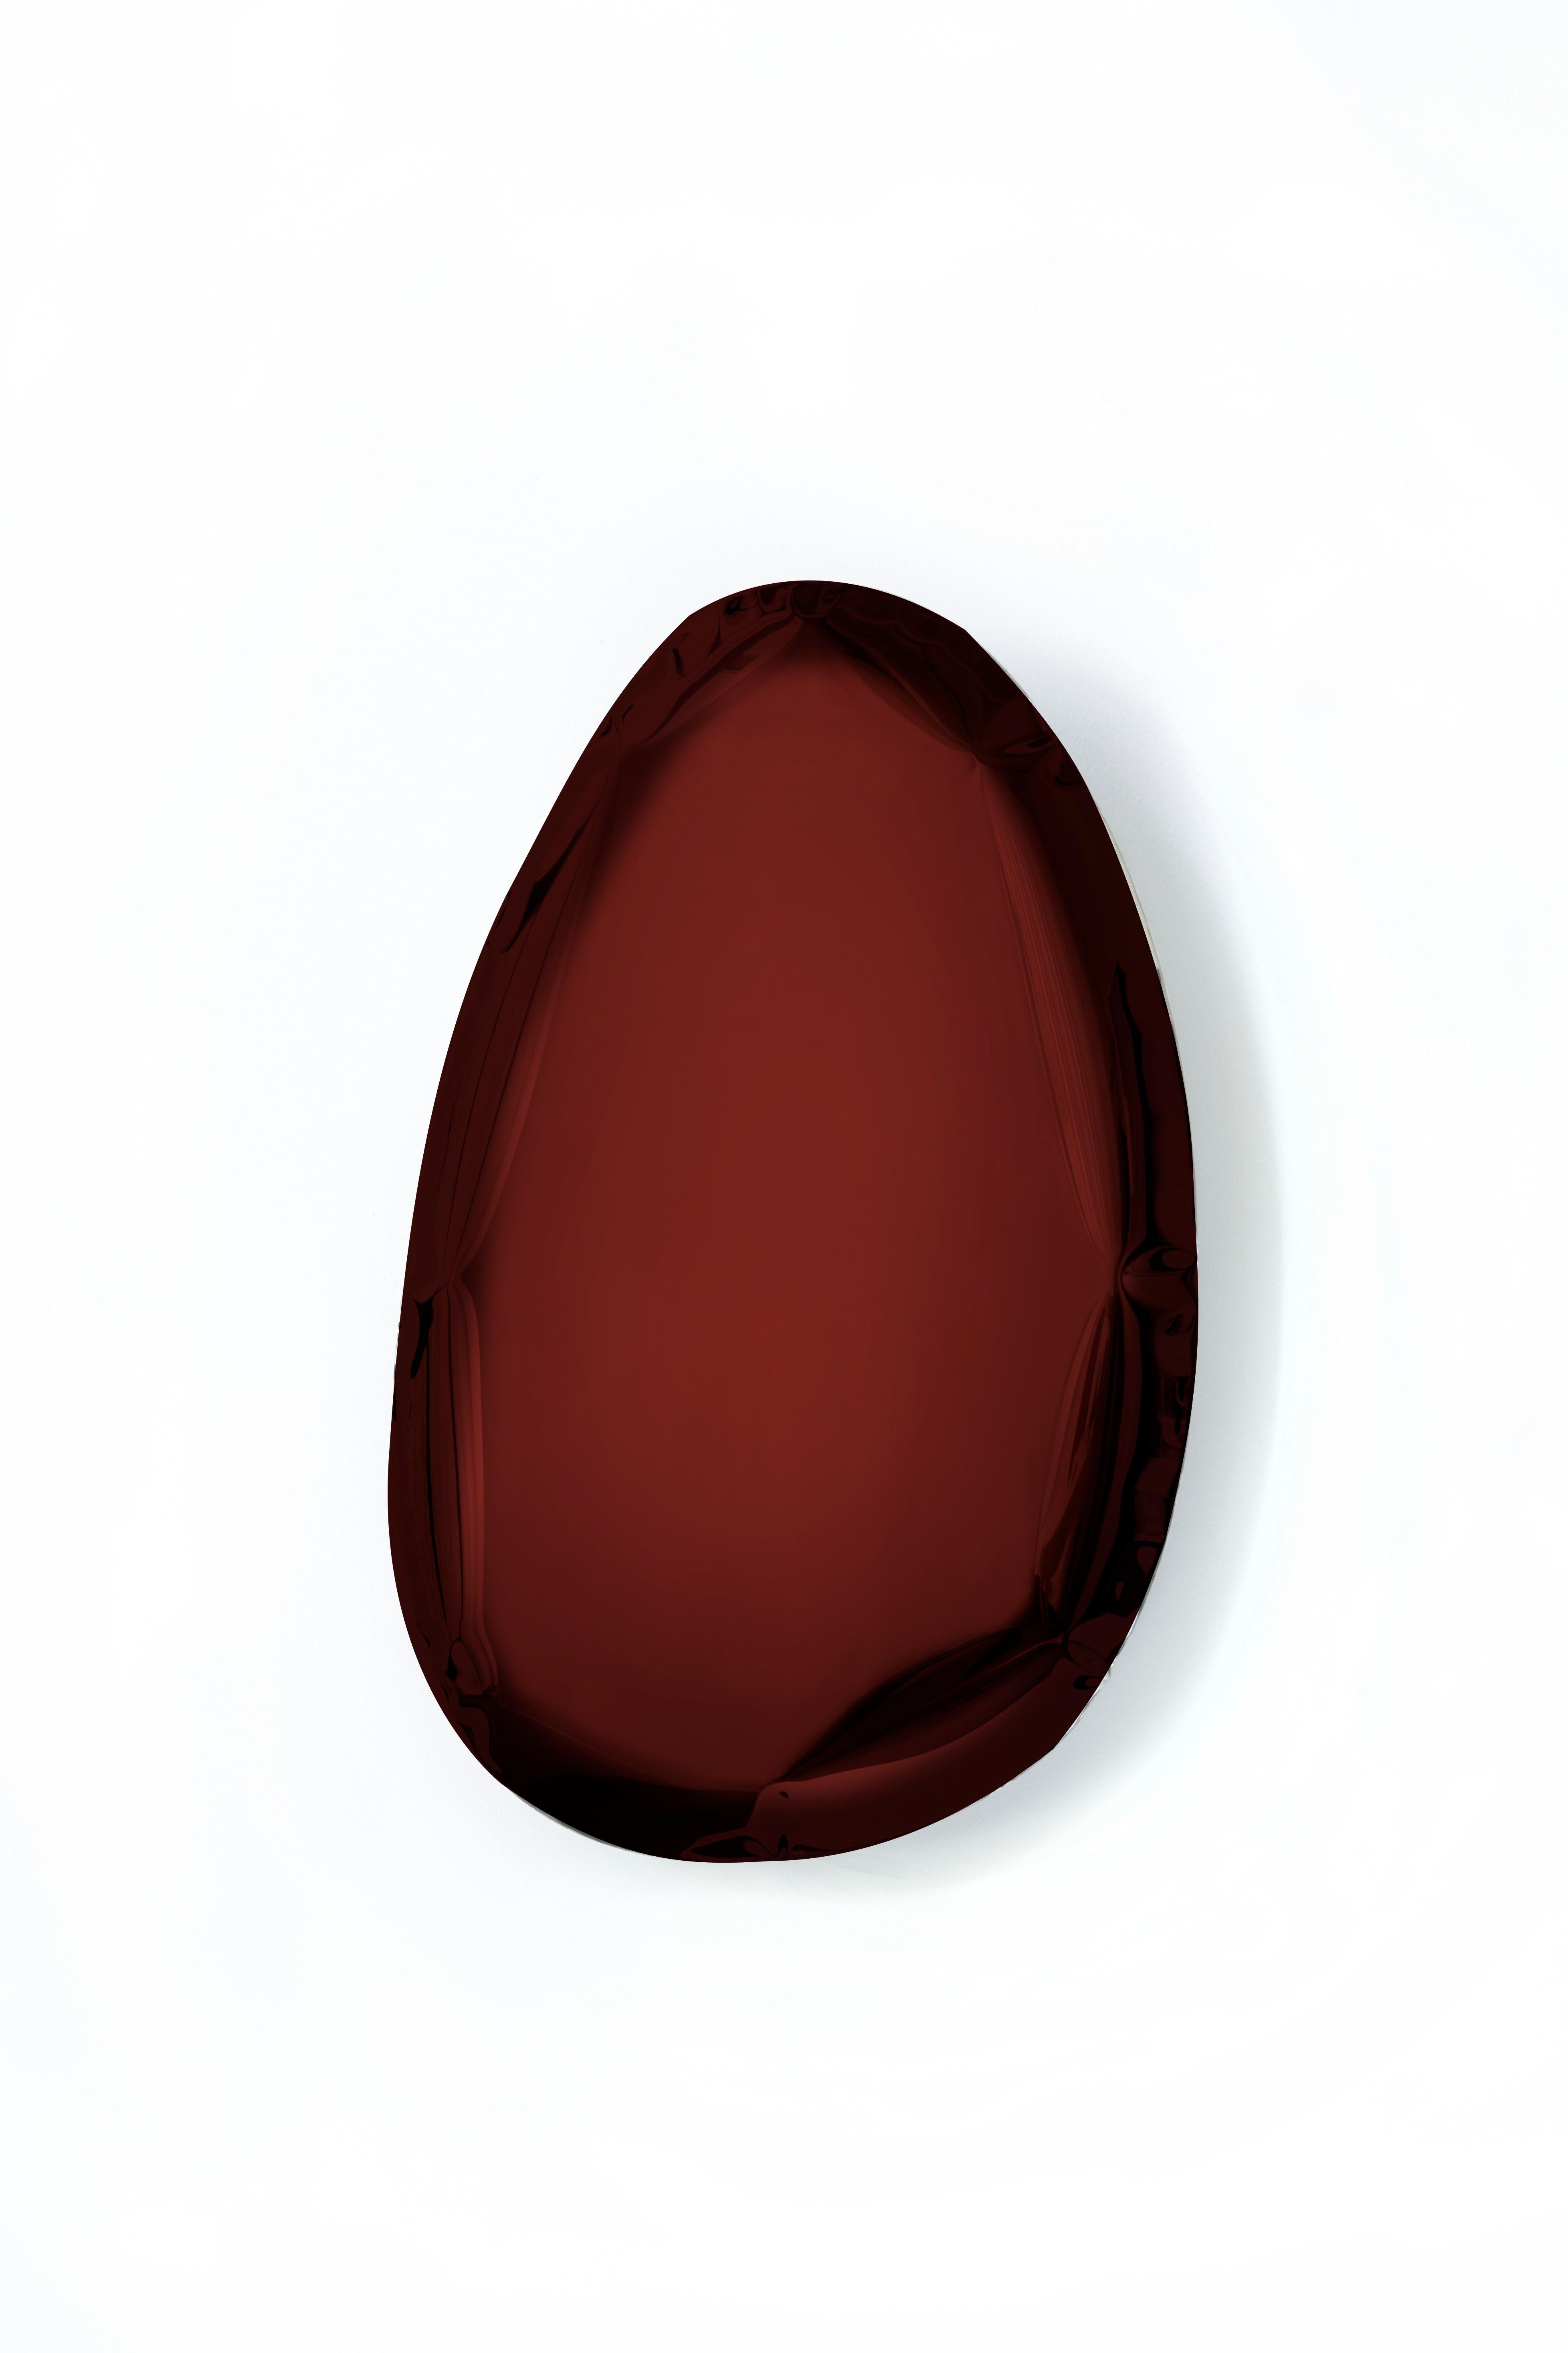 Mirror Tafla O2 Rubin Red, in Polished Stainless Steel by Zieta In New Condition For Sale In Paris, FR